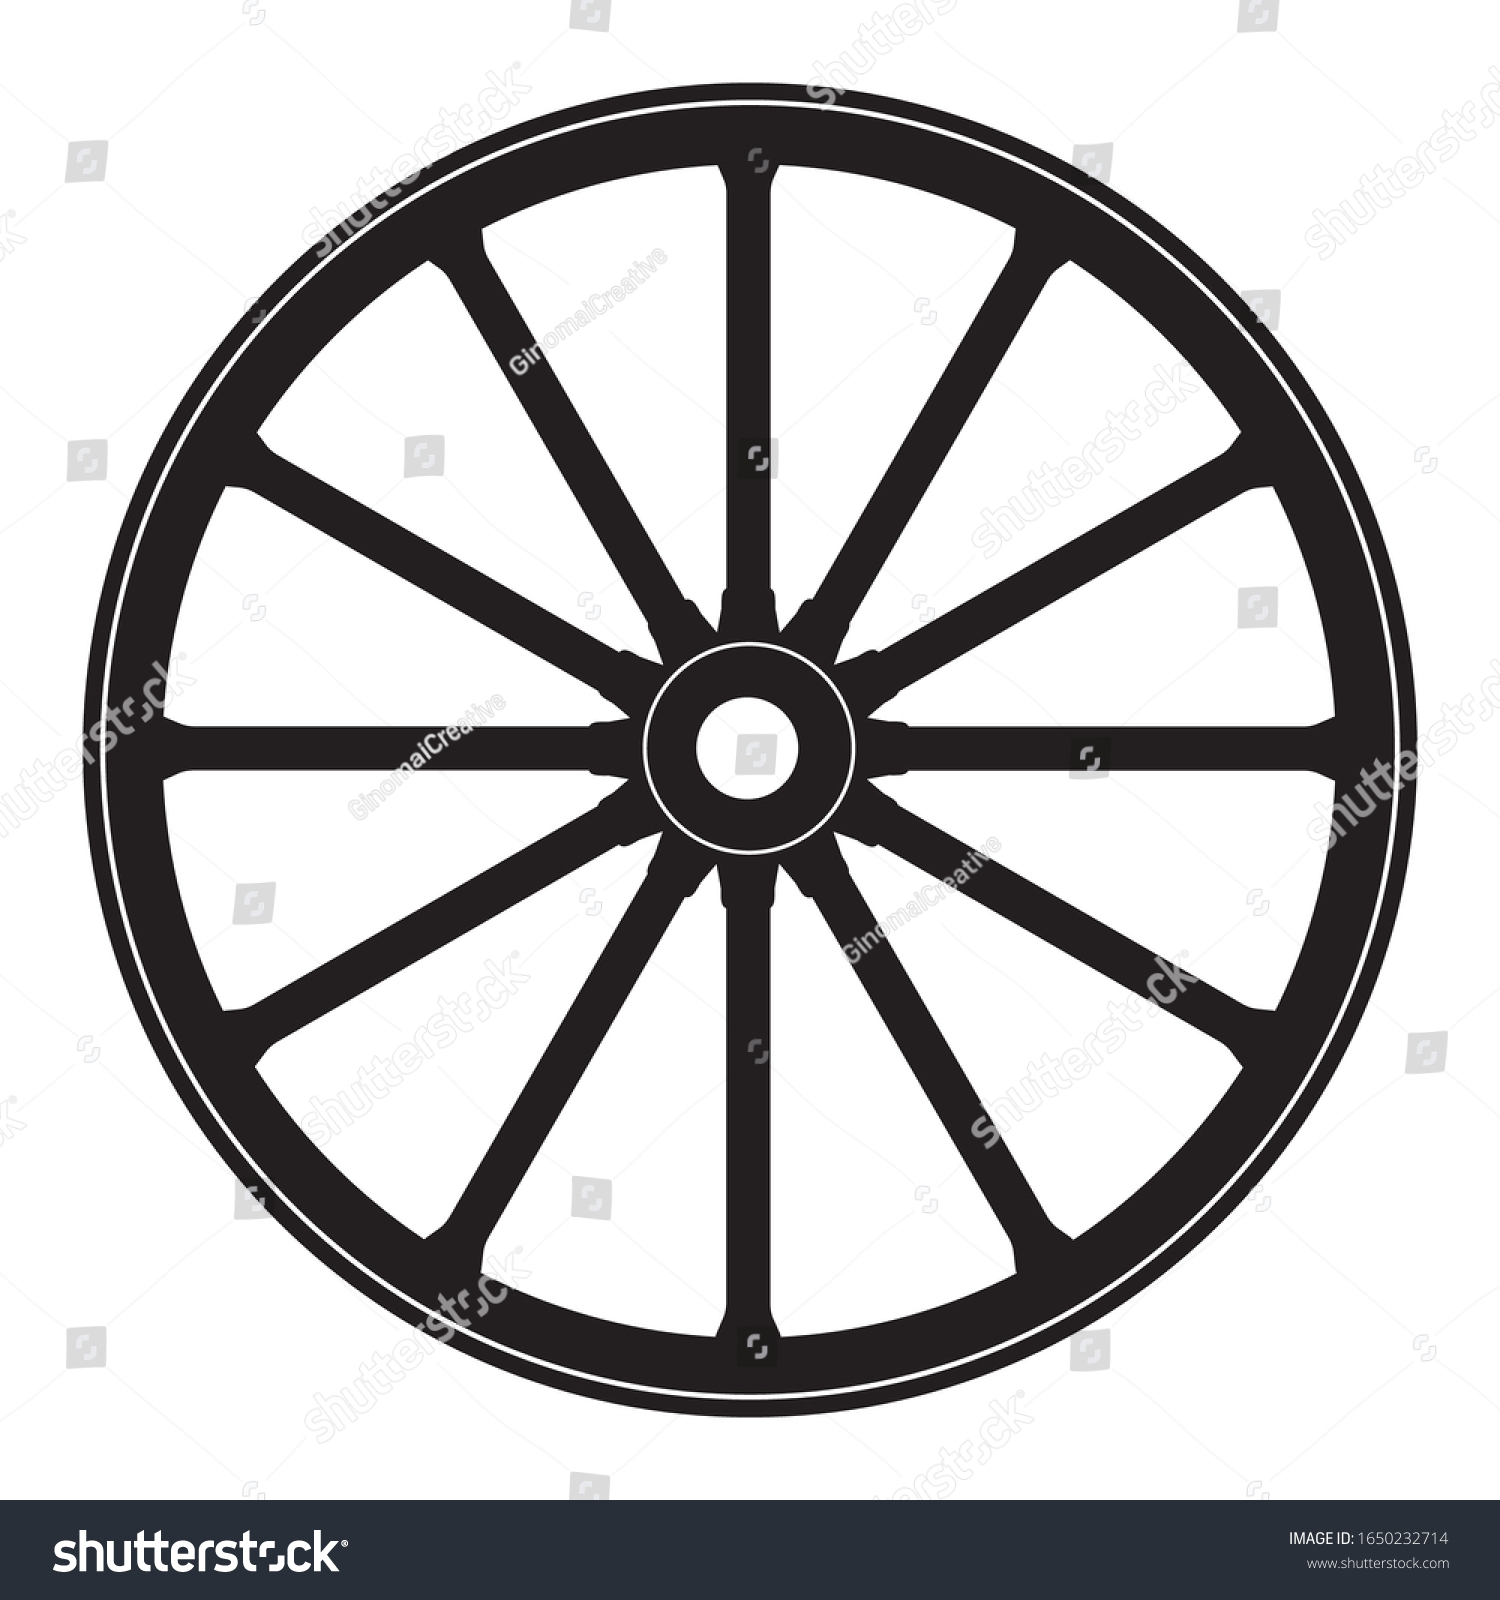 Western Old Fashioned Wagon Wheel Stock Vector (Royalty Free ...